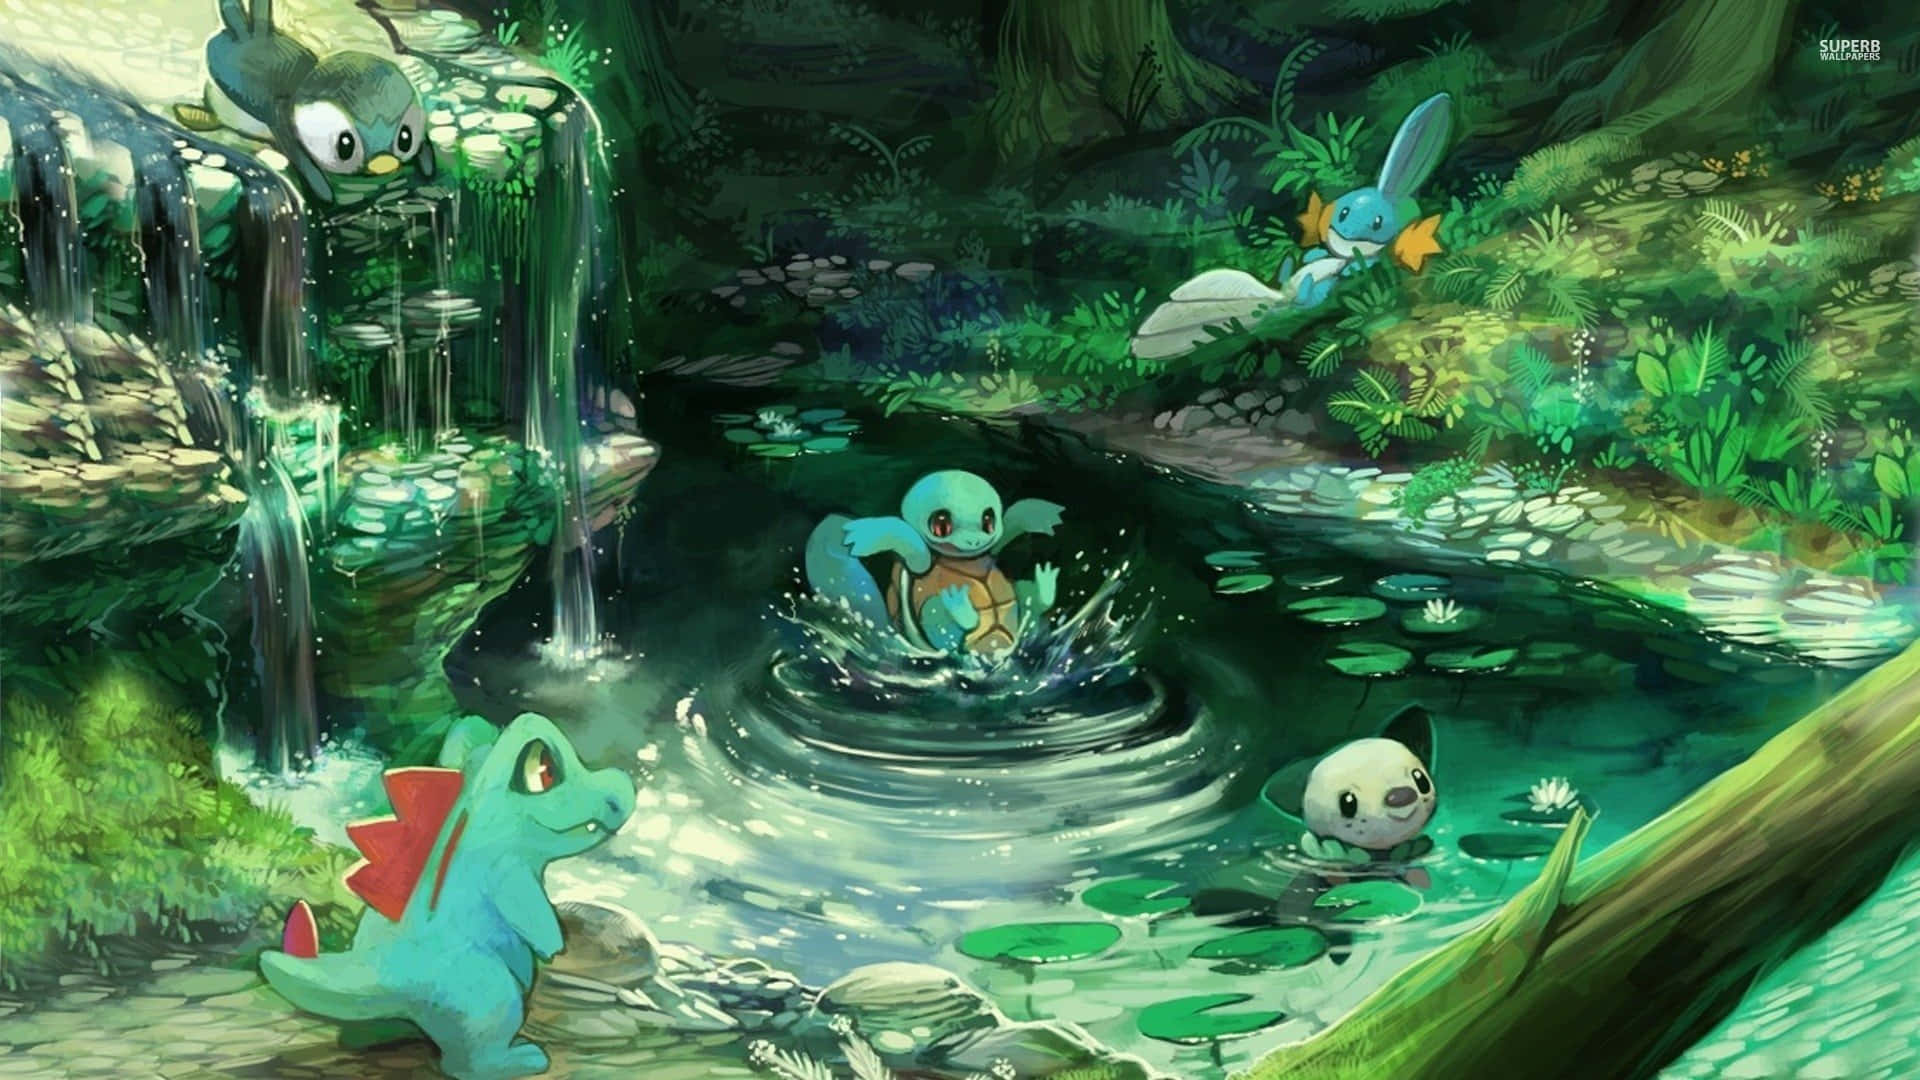 Totodile Looking At Friends In Creek